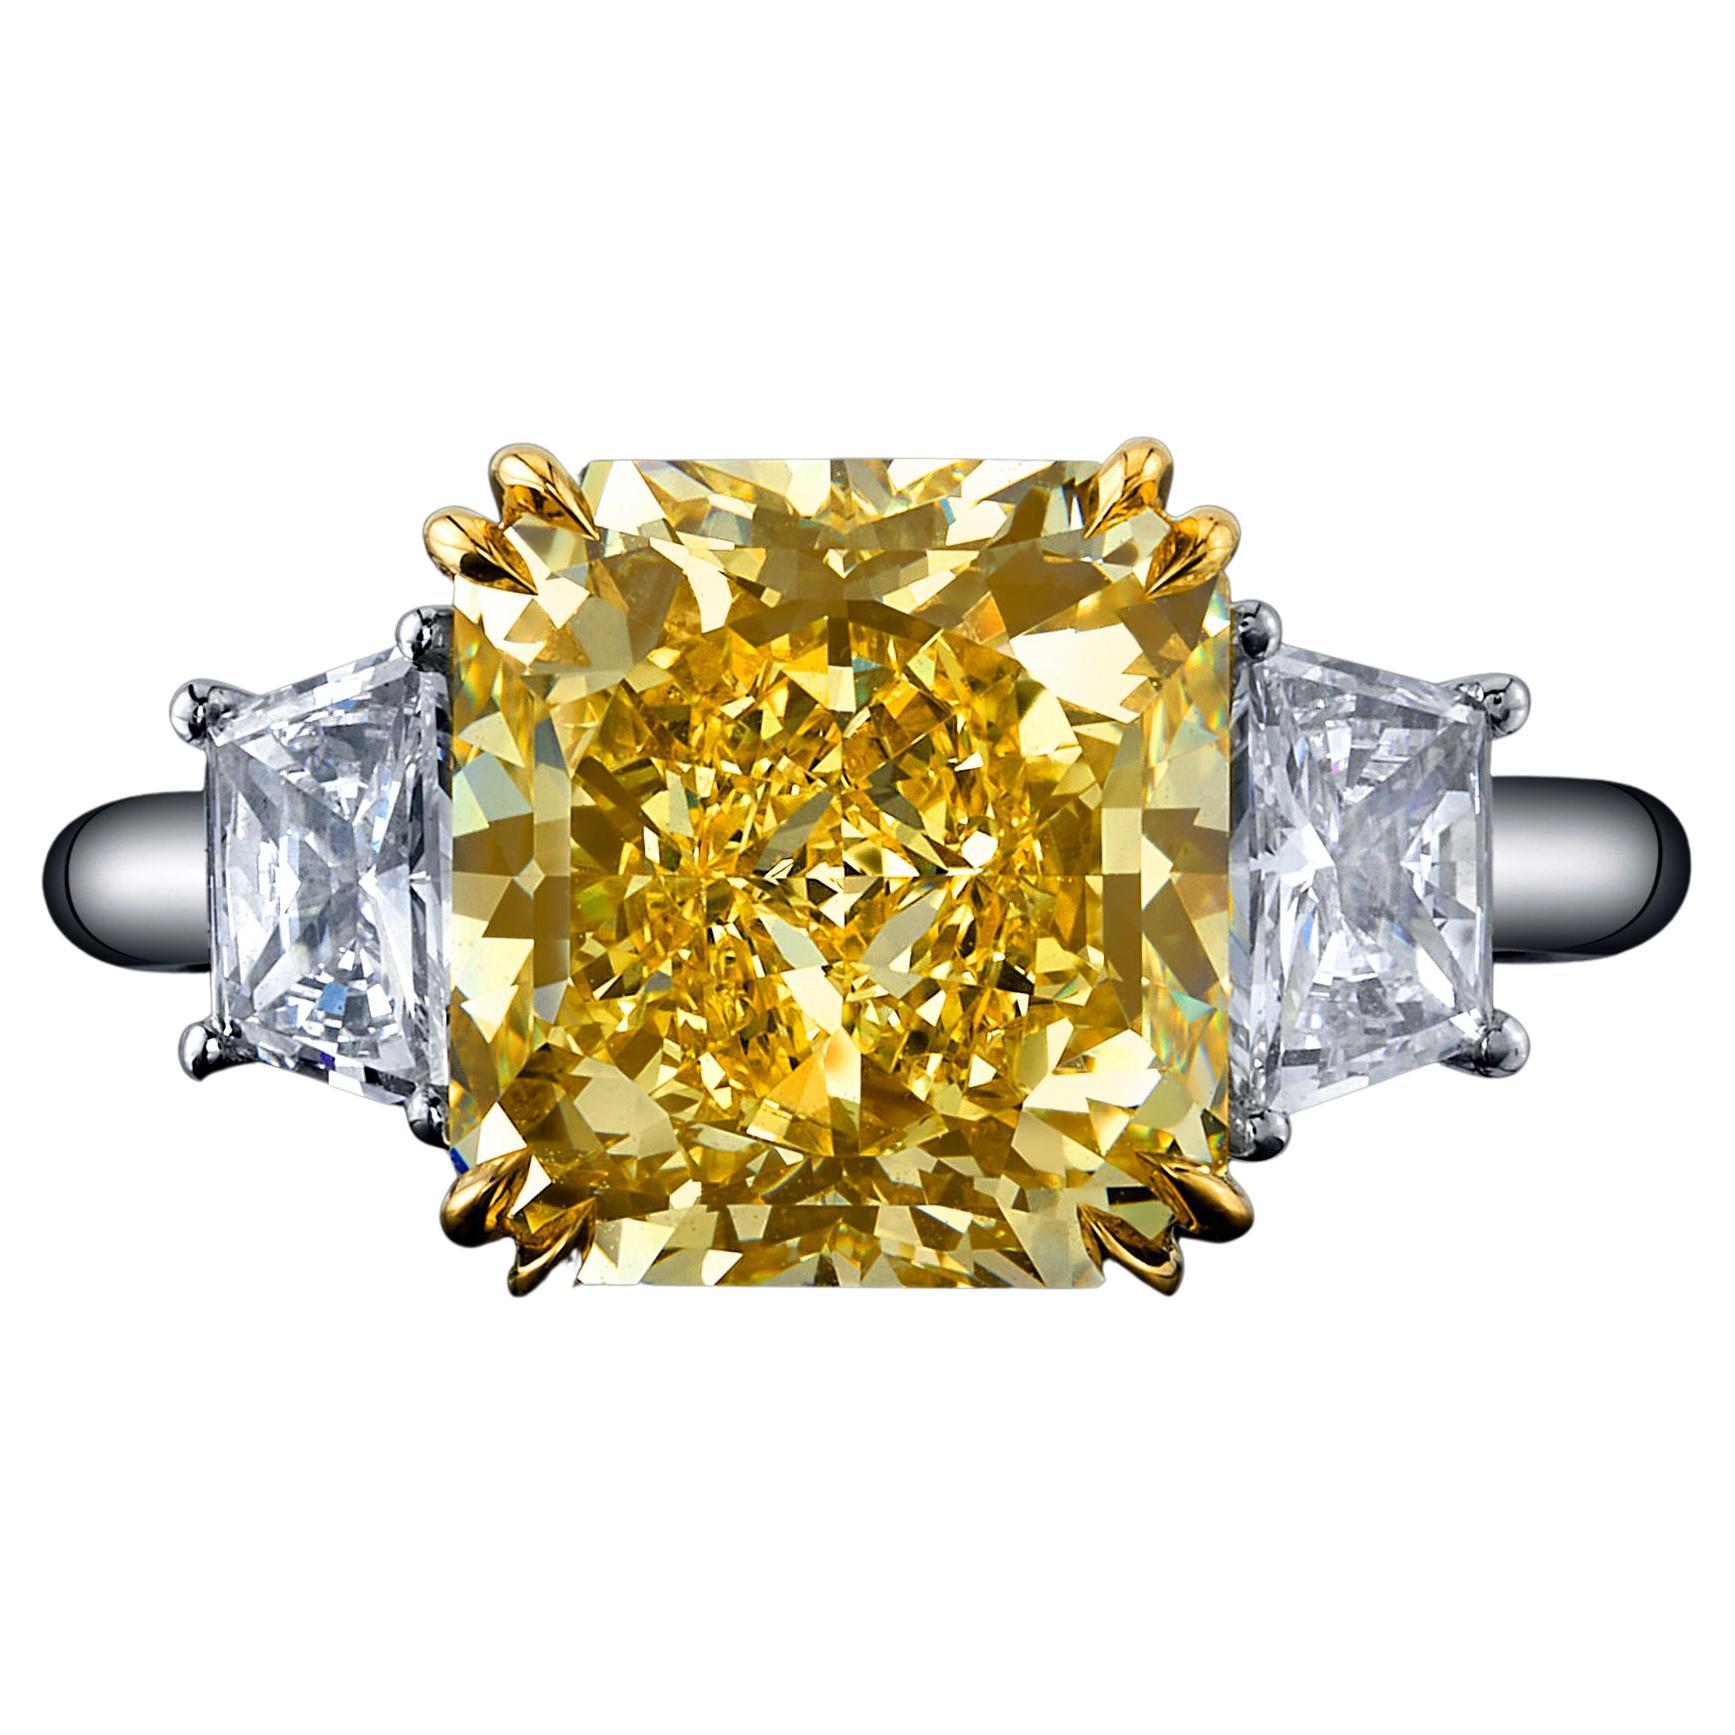 GIA Certified, Large and Classic 5.10ct Radiant Fancy Yellow Diamond, IF